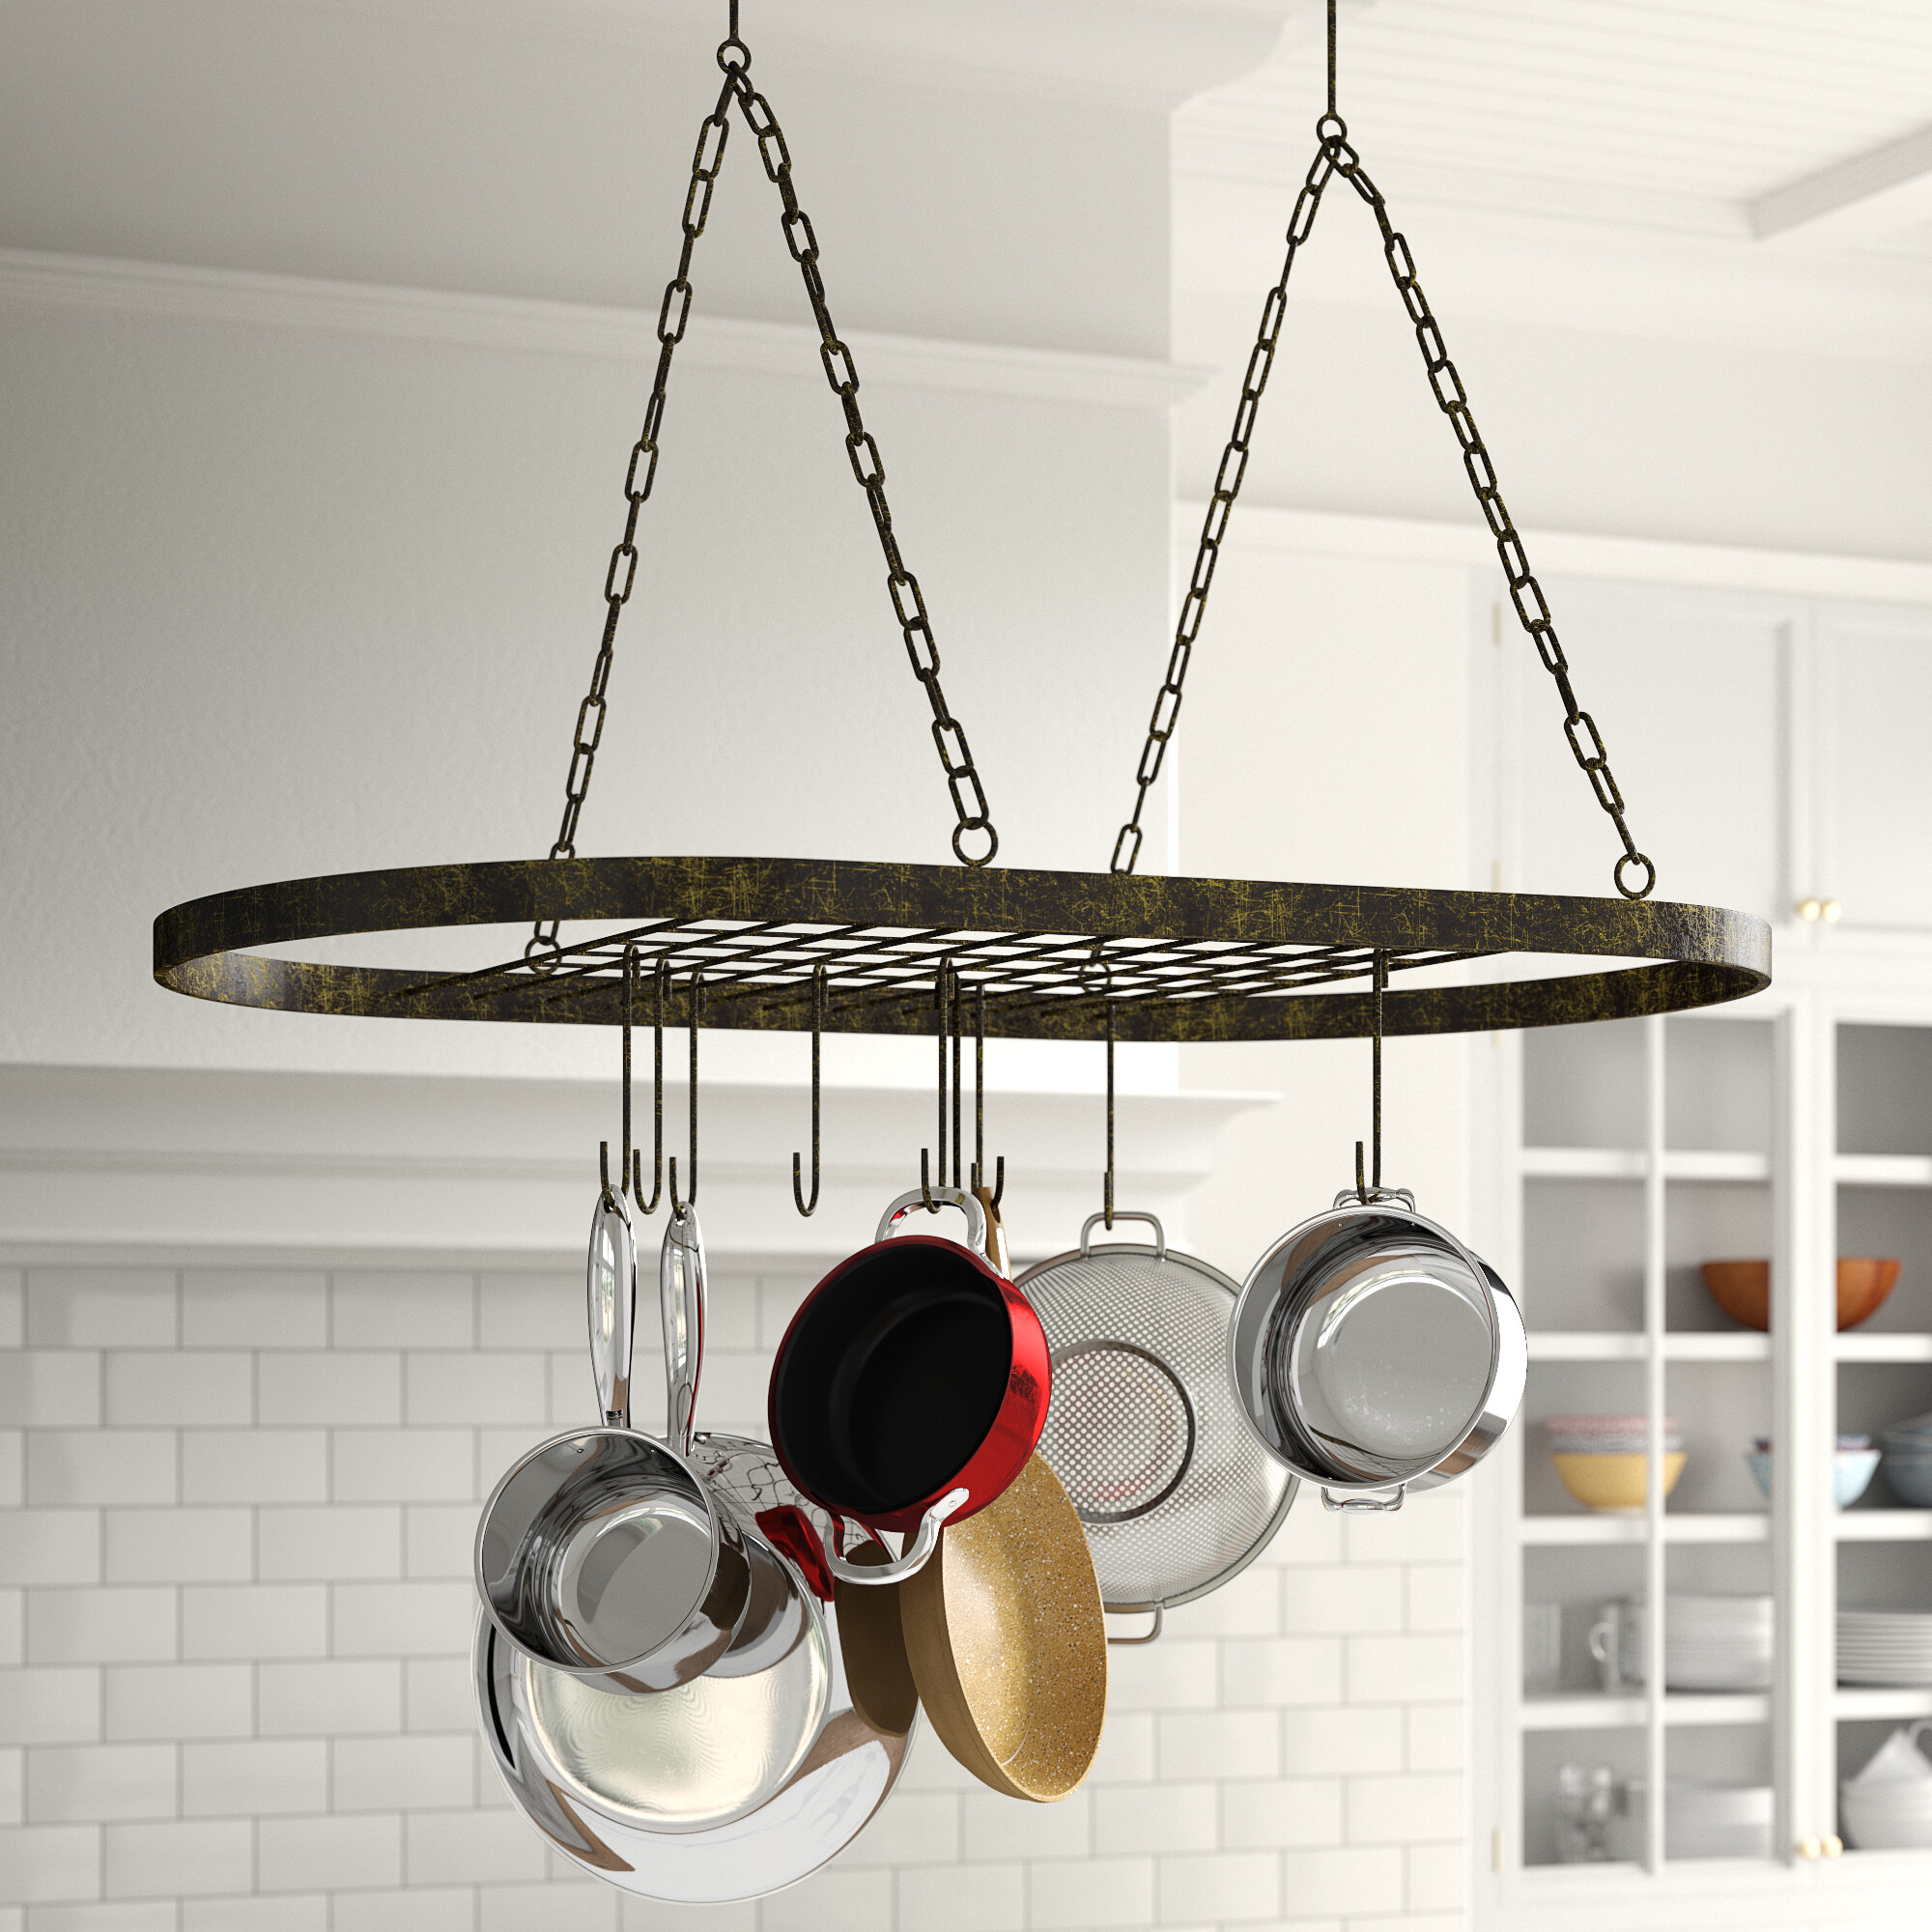 Wayfair Small (Up to 24 inches) Pot Racks You'll Love in 2023